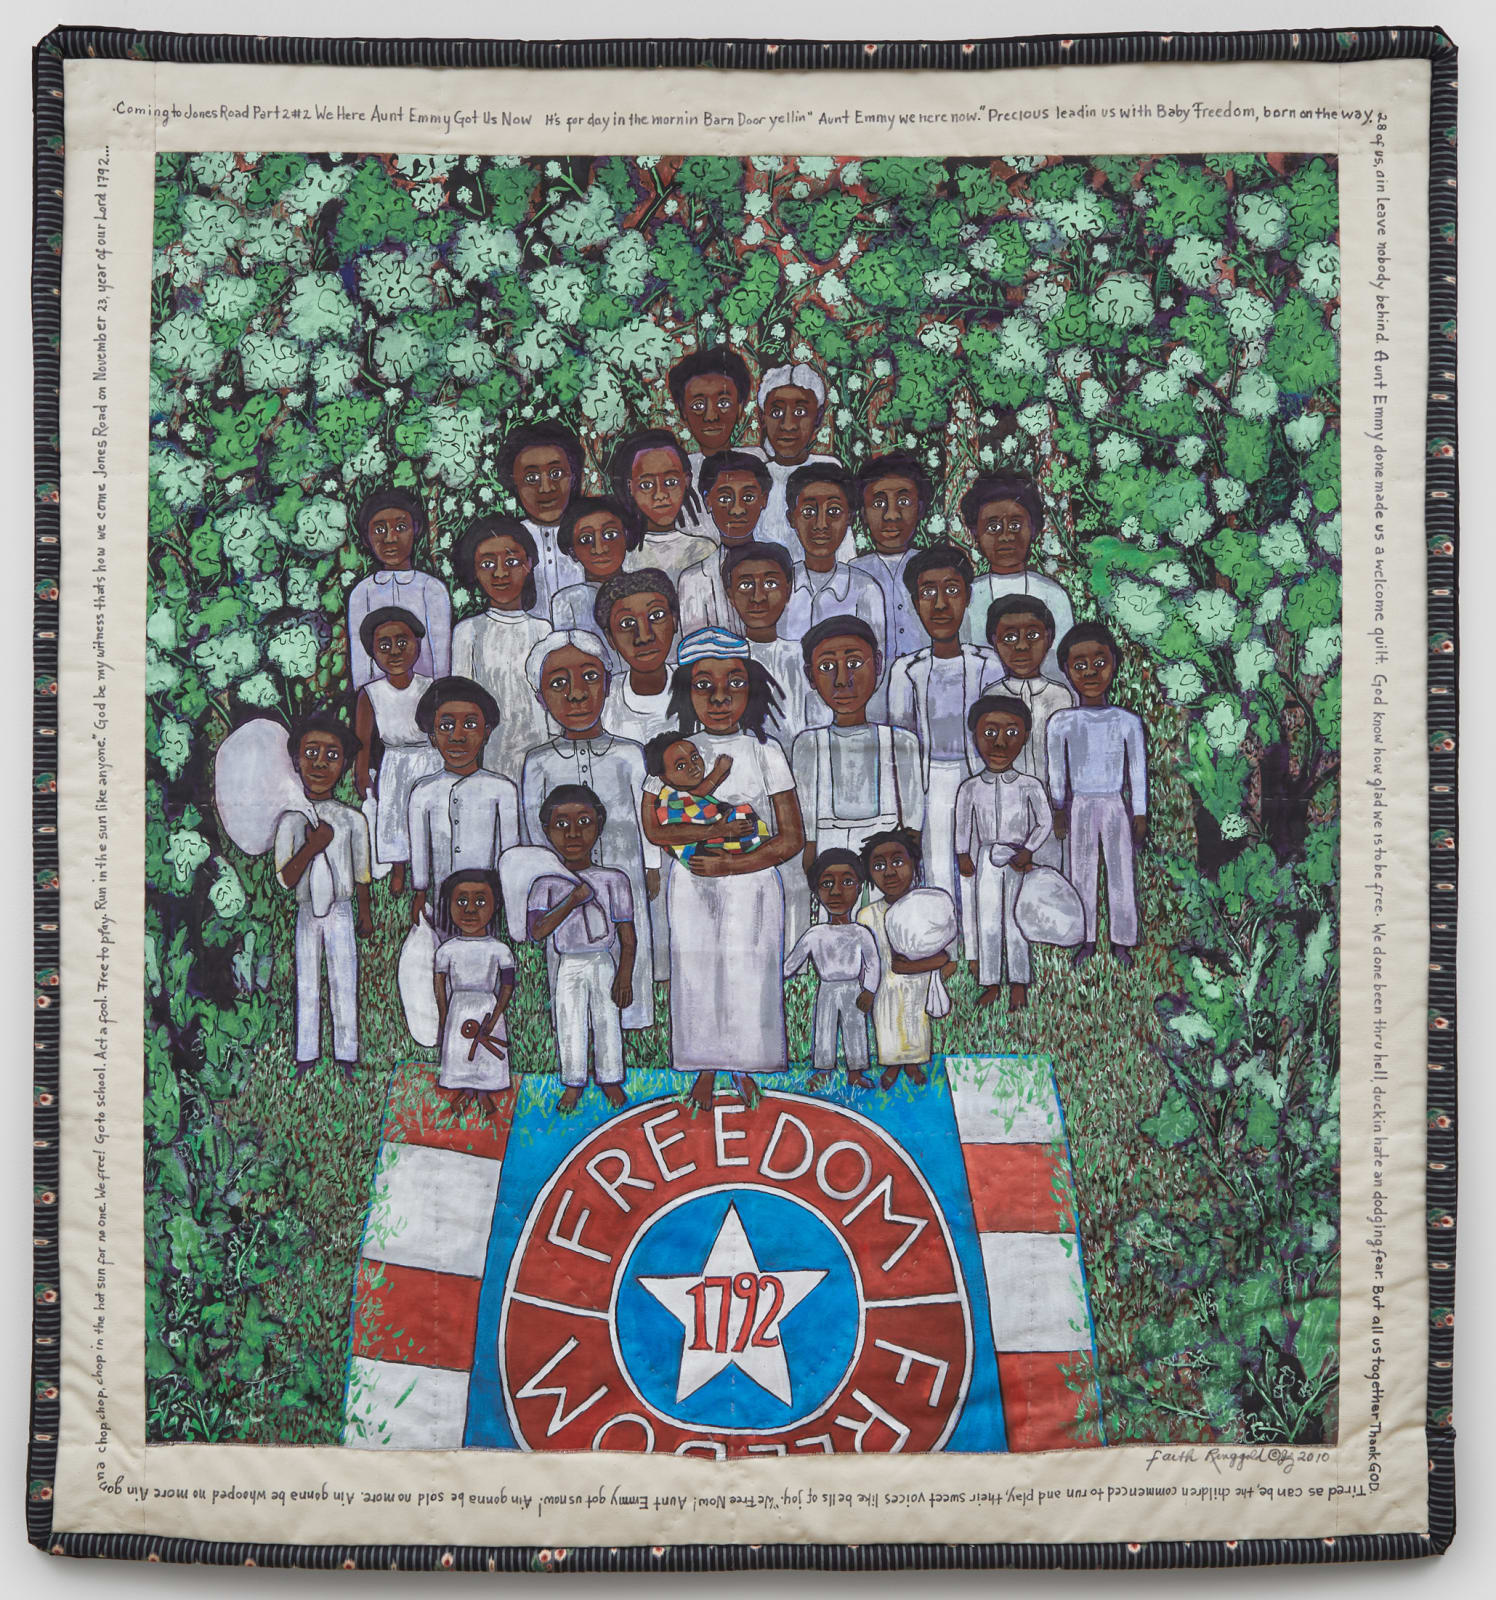 Faith Ringgold, Coming to Jones Road Part 2 #2: We Here Aunt Emmy Got Us Now, 2010